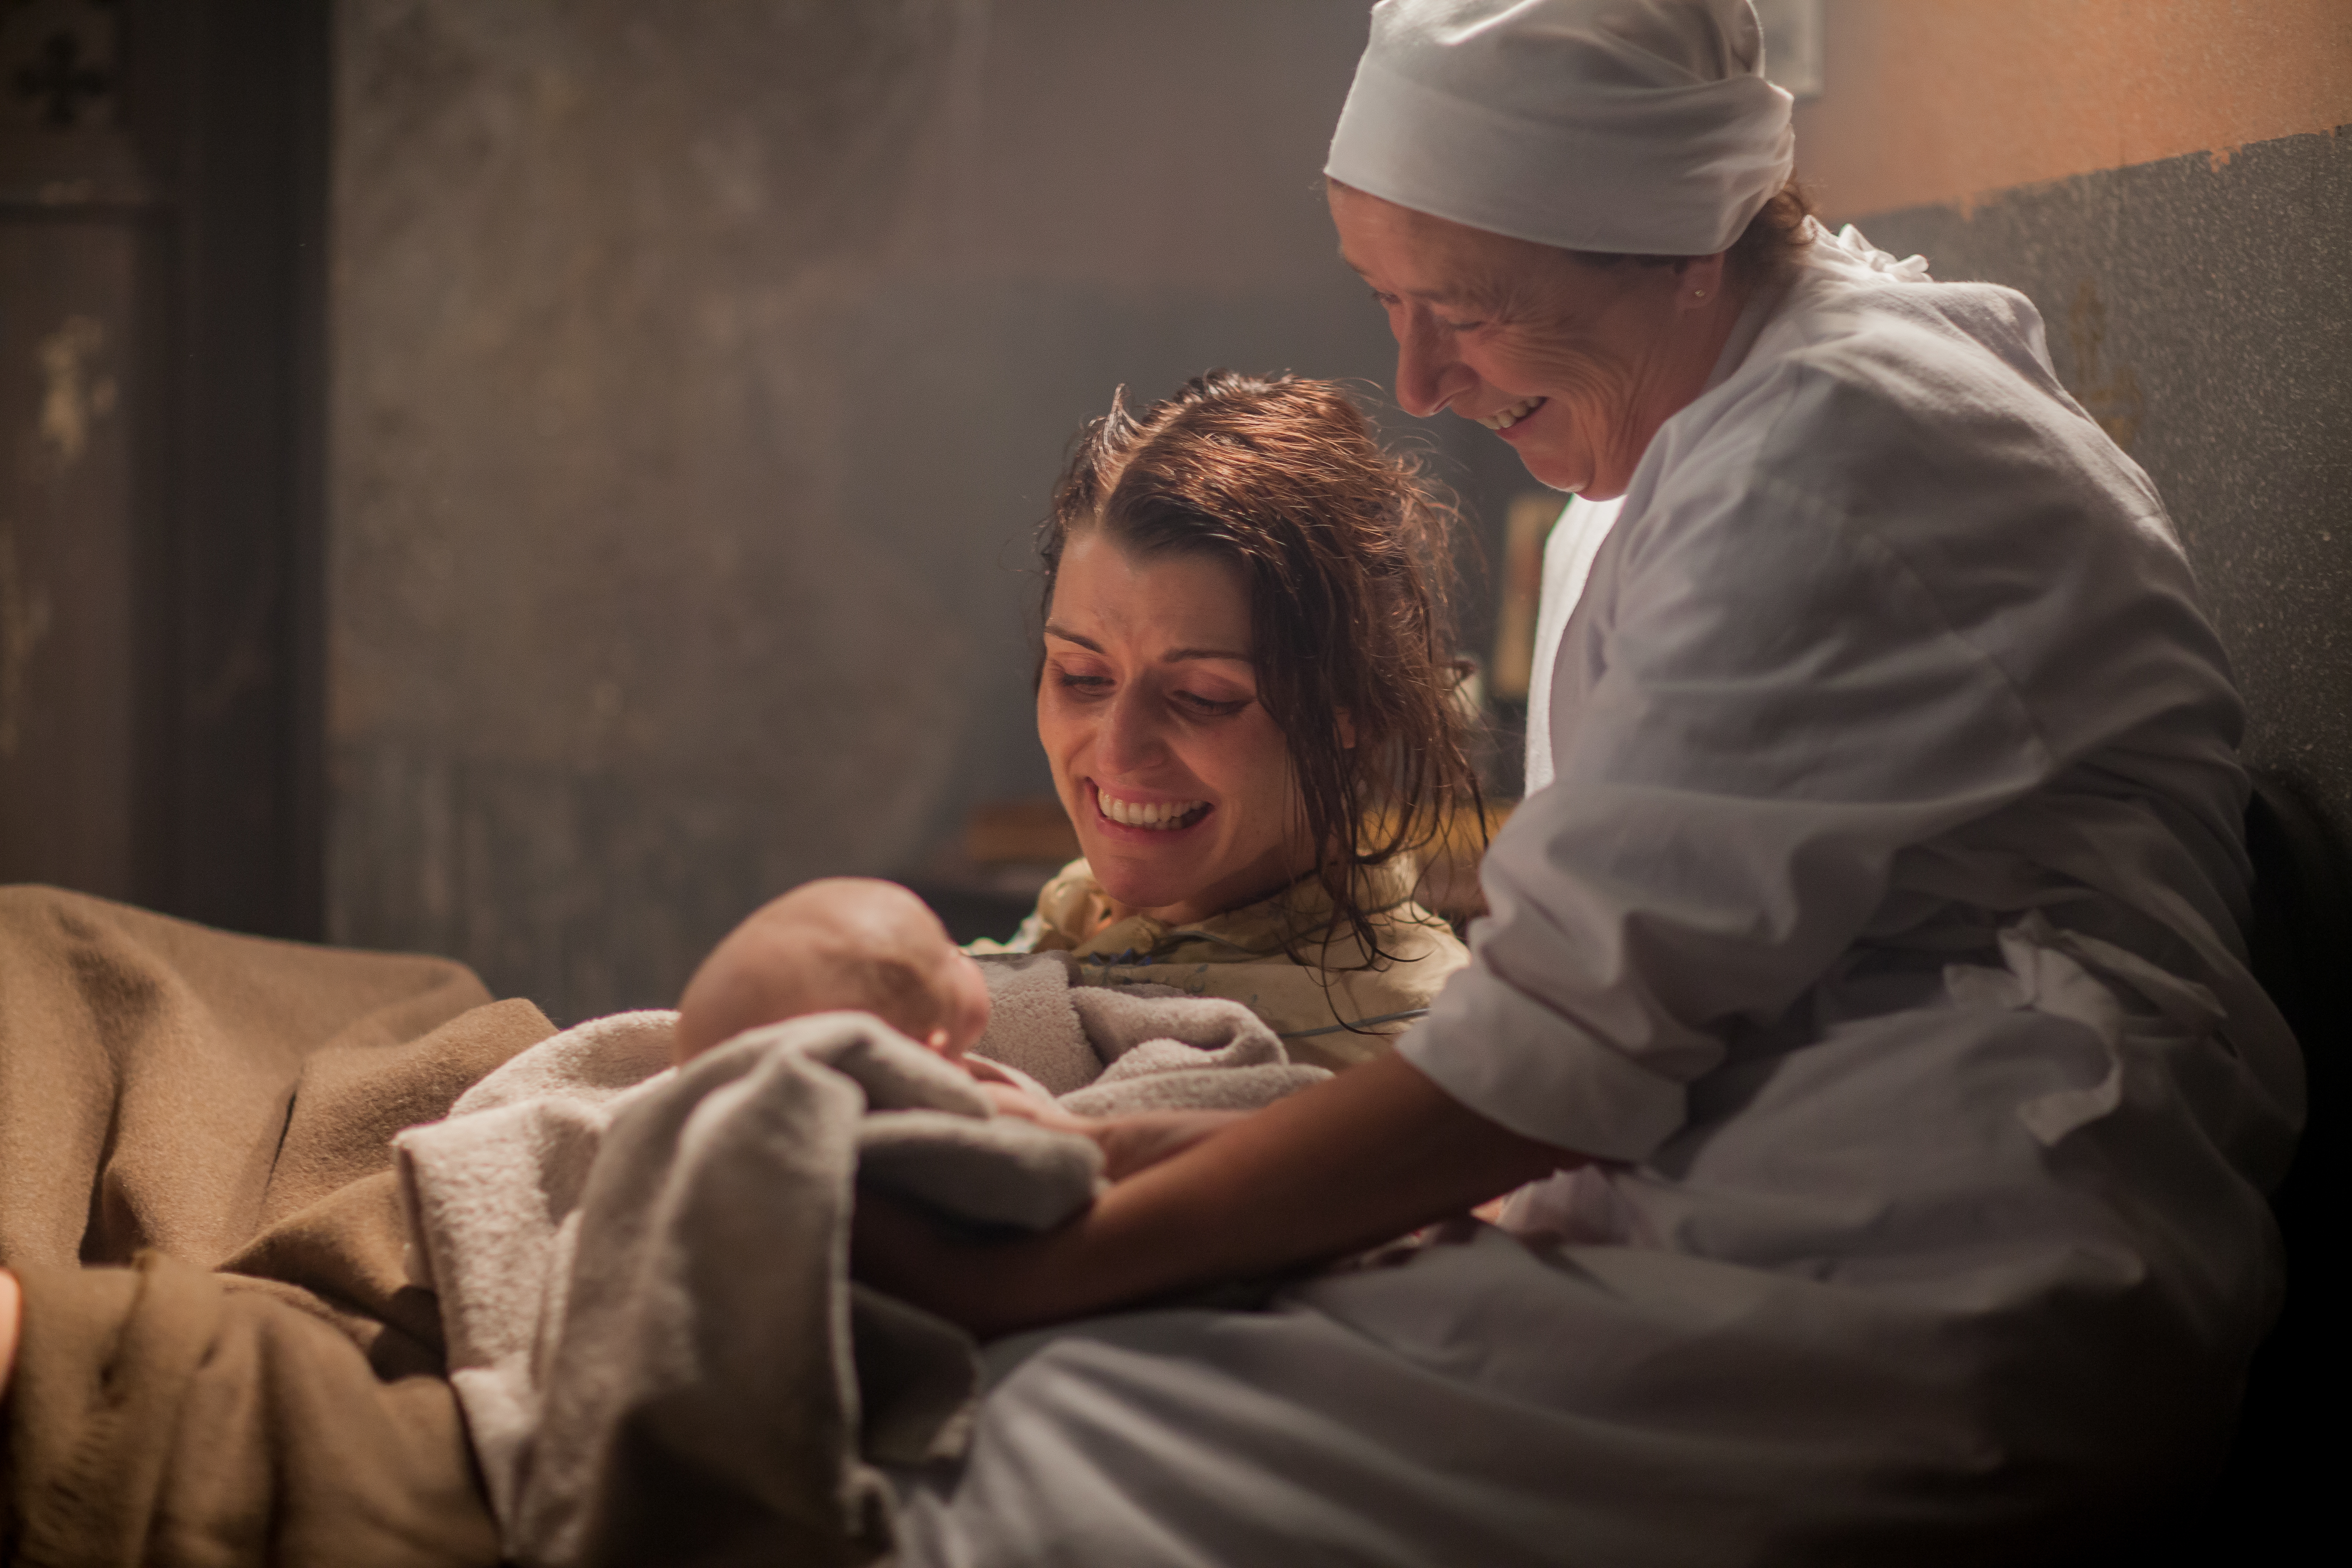 Dolores McEvoy (Siobhan O’Kelly) and Nurse Phyllis Crane in labour. (Photo: Courtesy of Laurence Cendrowicz/Laurence Cendrowicz)